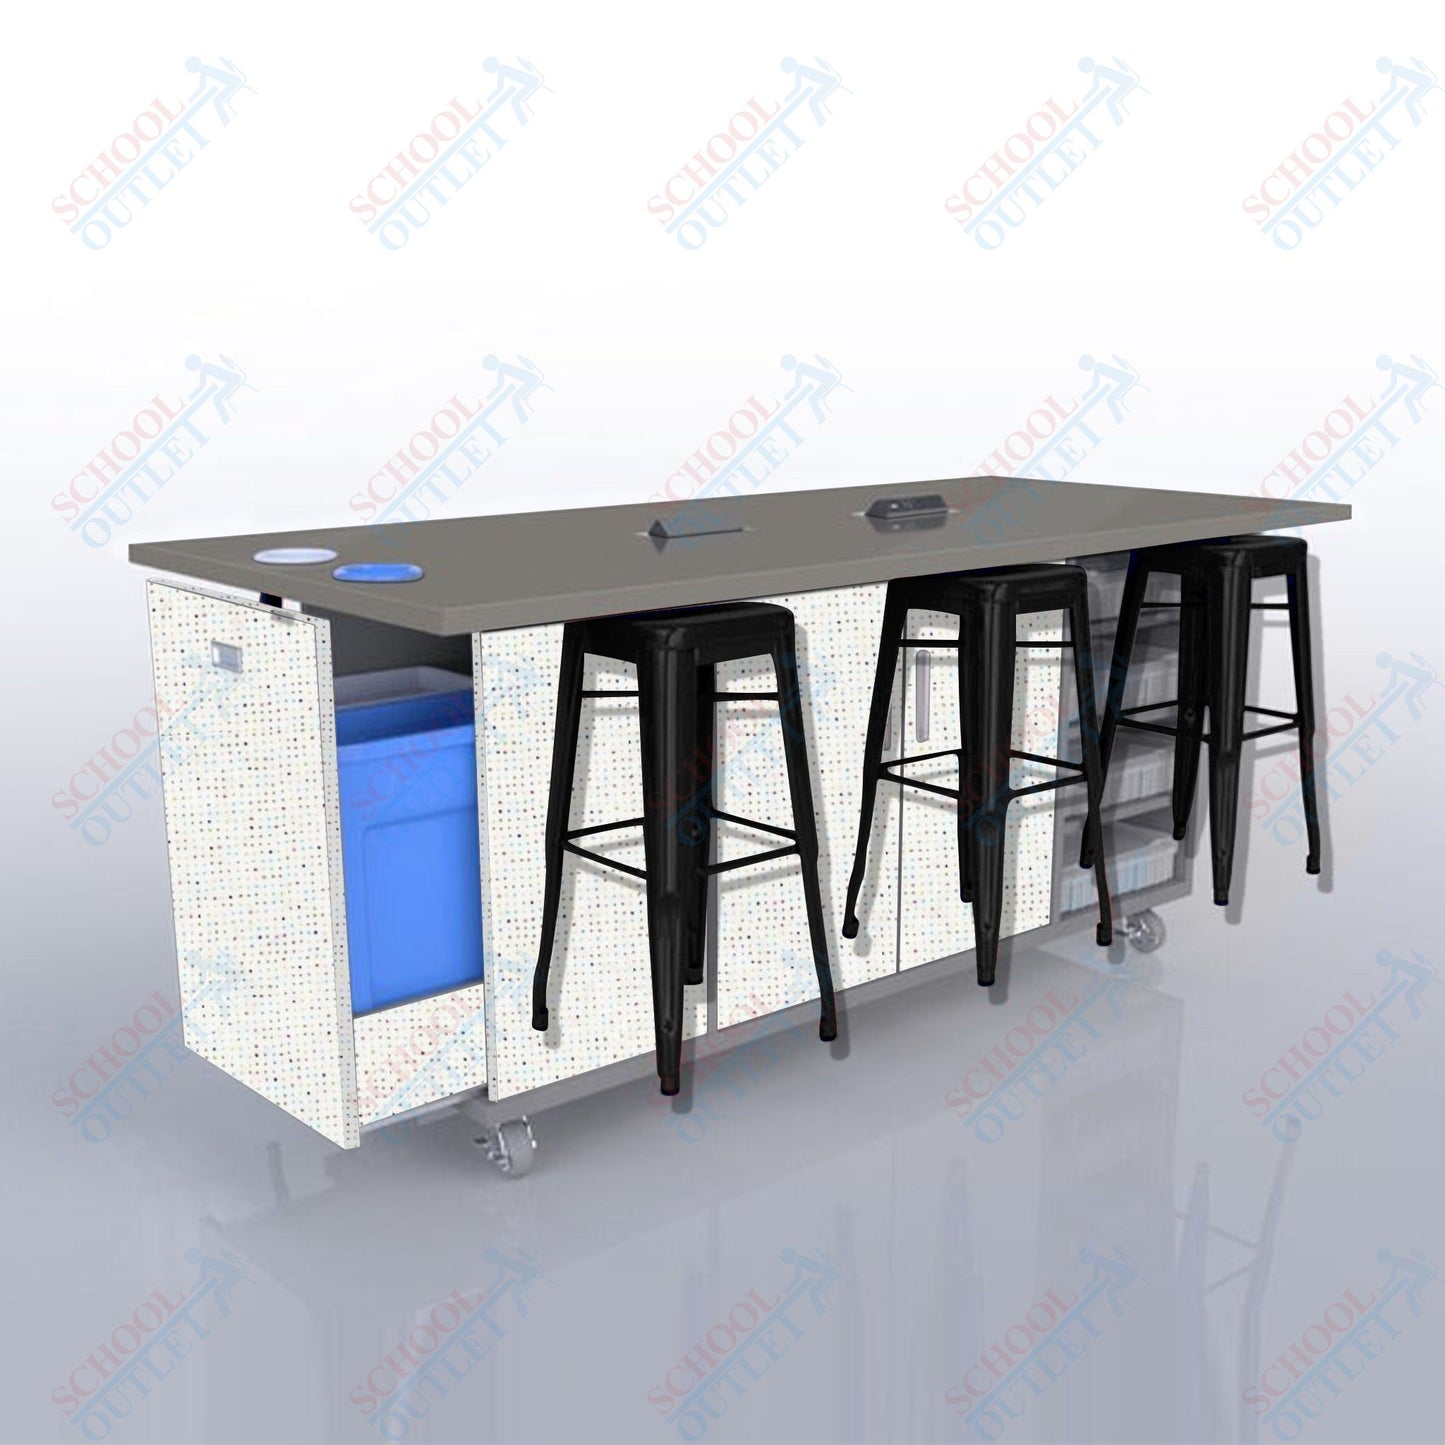 CEF ED Original Table 42"H High Pressure Laminate Top, Laminate Base with  6 Stools, Storage Bins, Trash Bins, and Electrical Outlets Included.